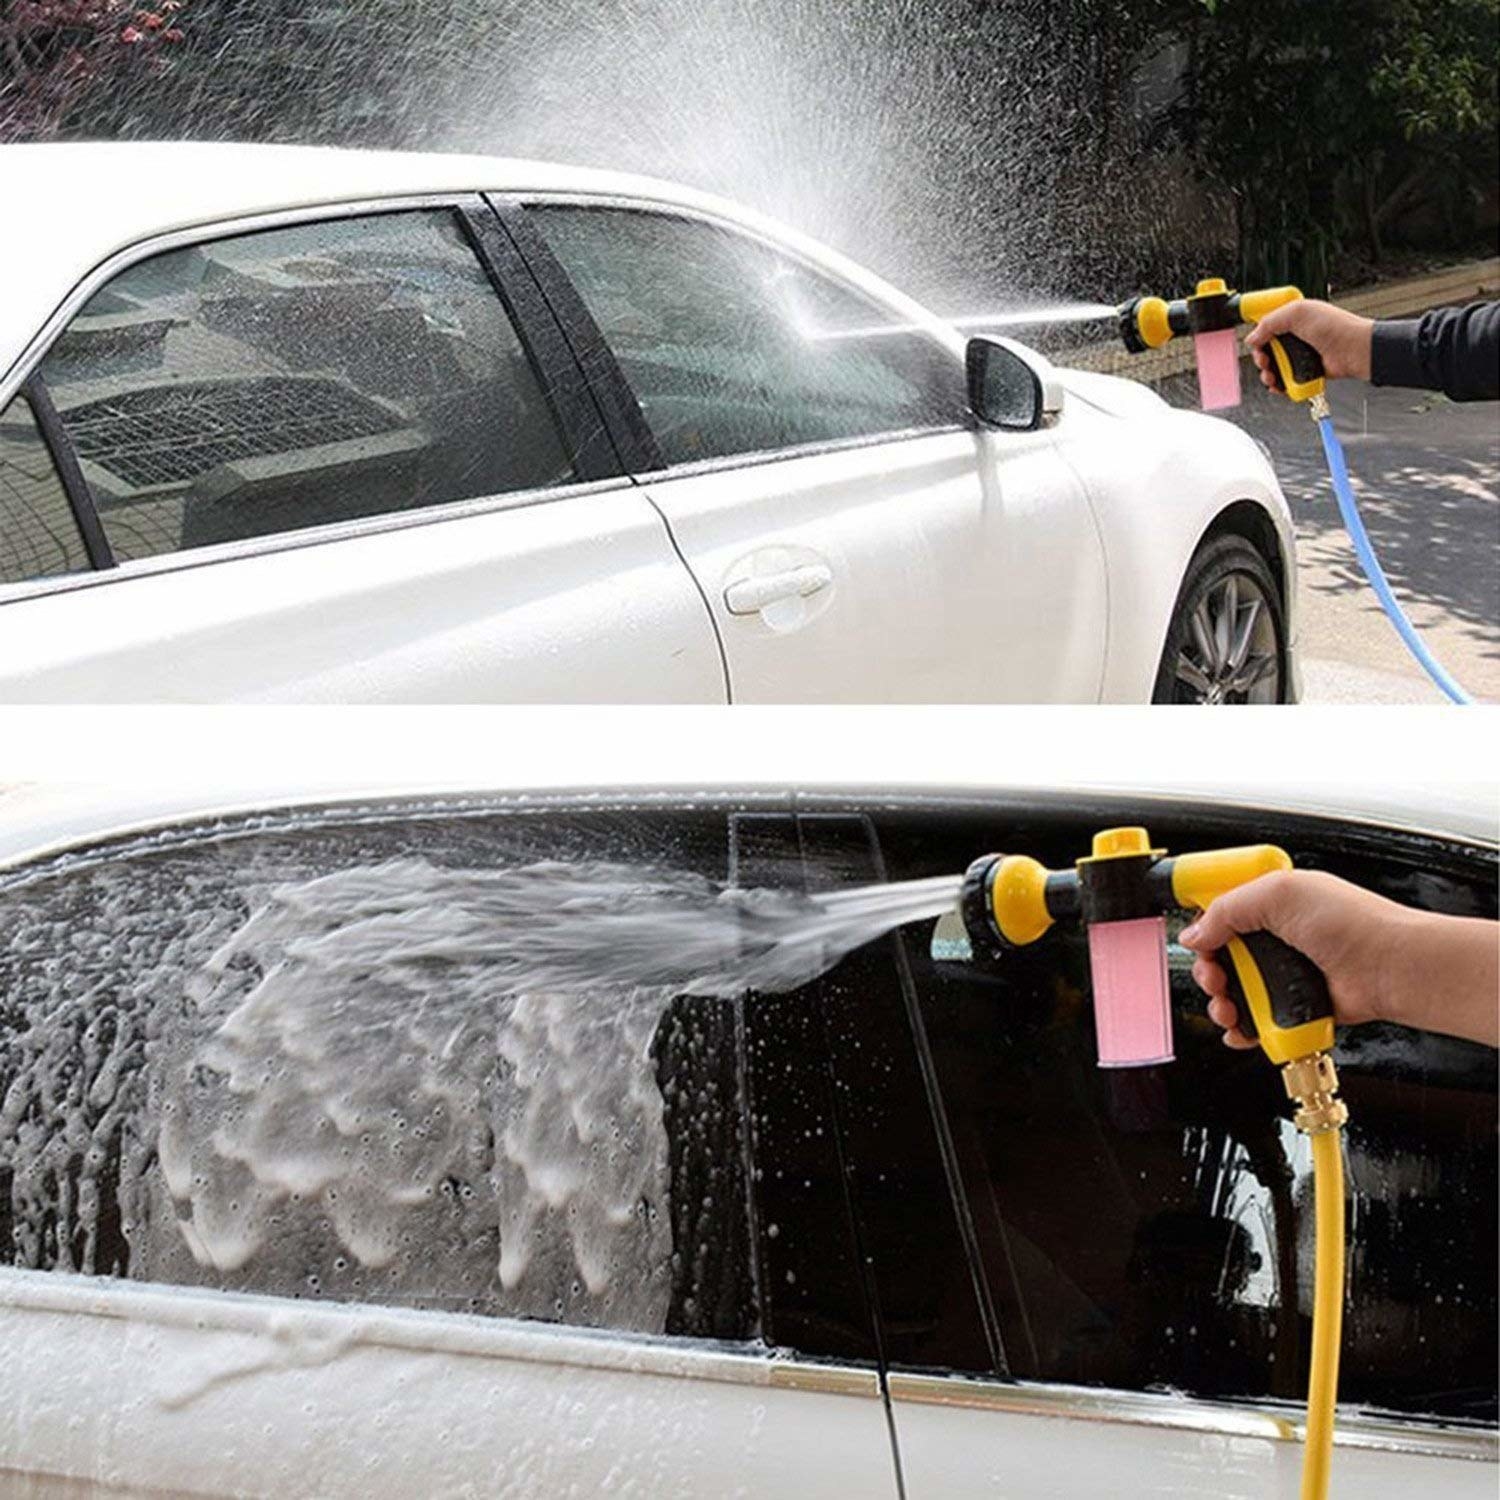 A hand holding the nozzle gun, spraying water on a car.